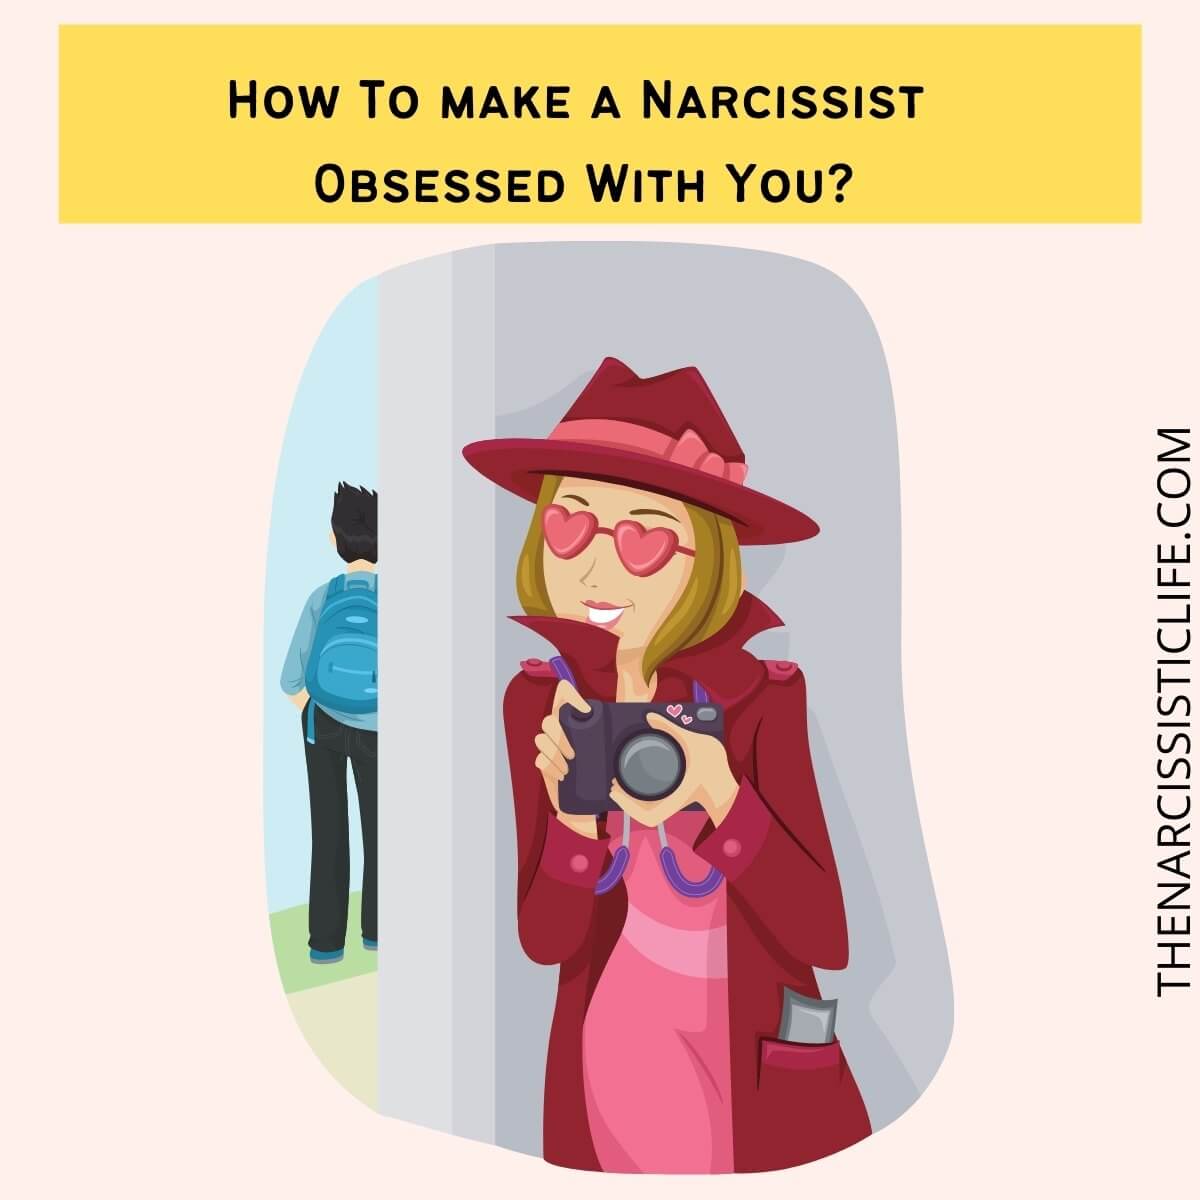 How To make a Narcissist Obsessed With You